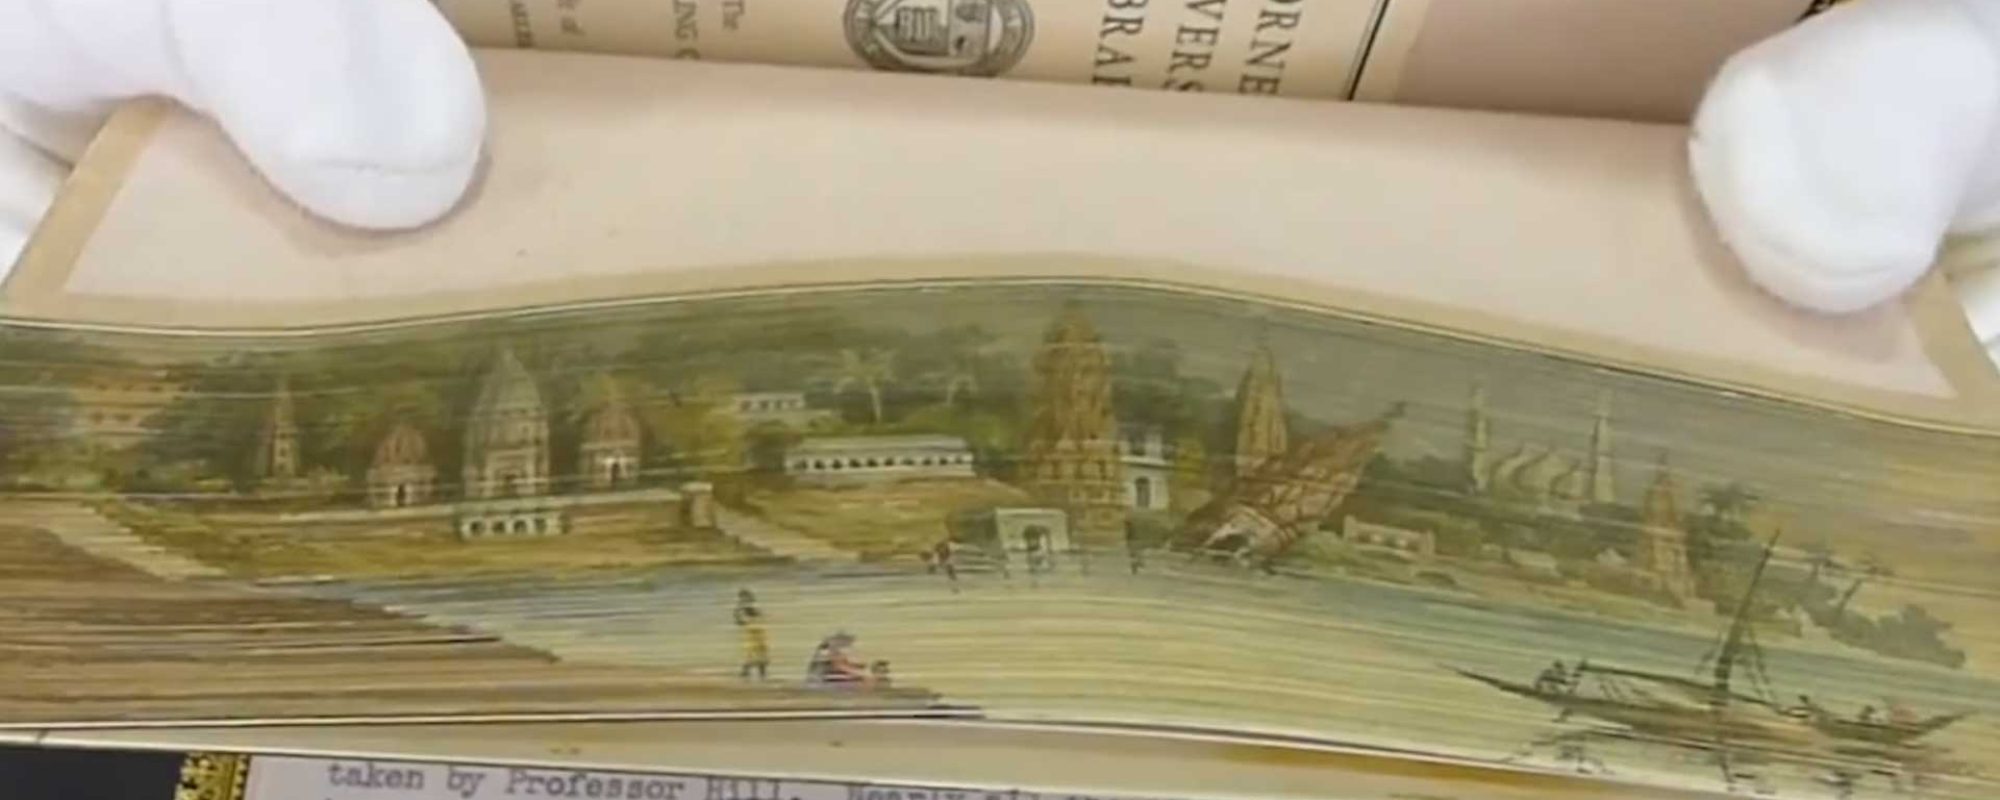 Hidden Paintings on the Edges of Books